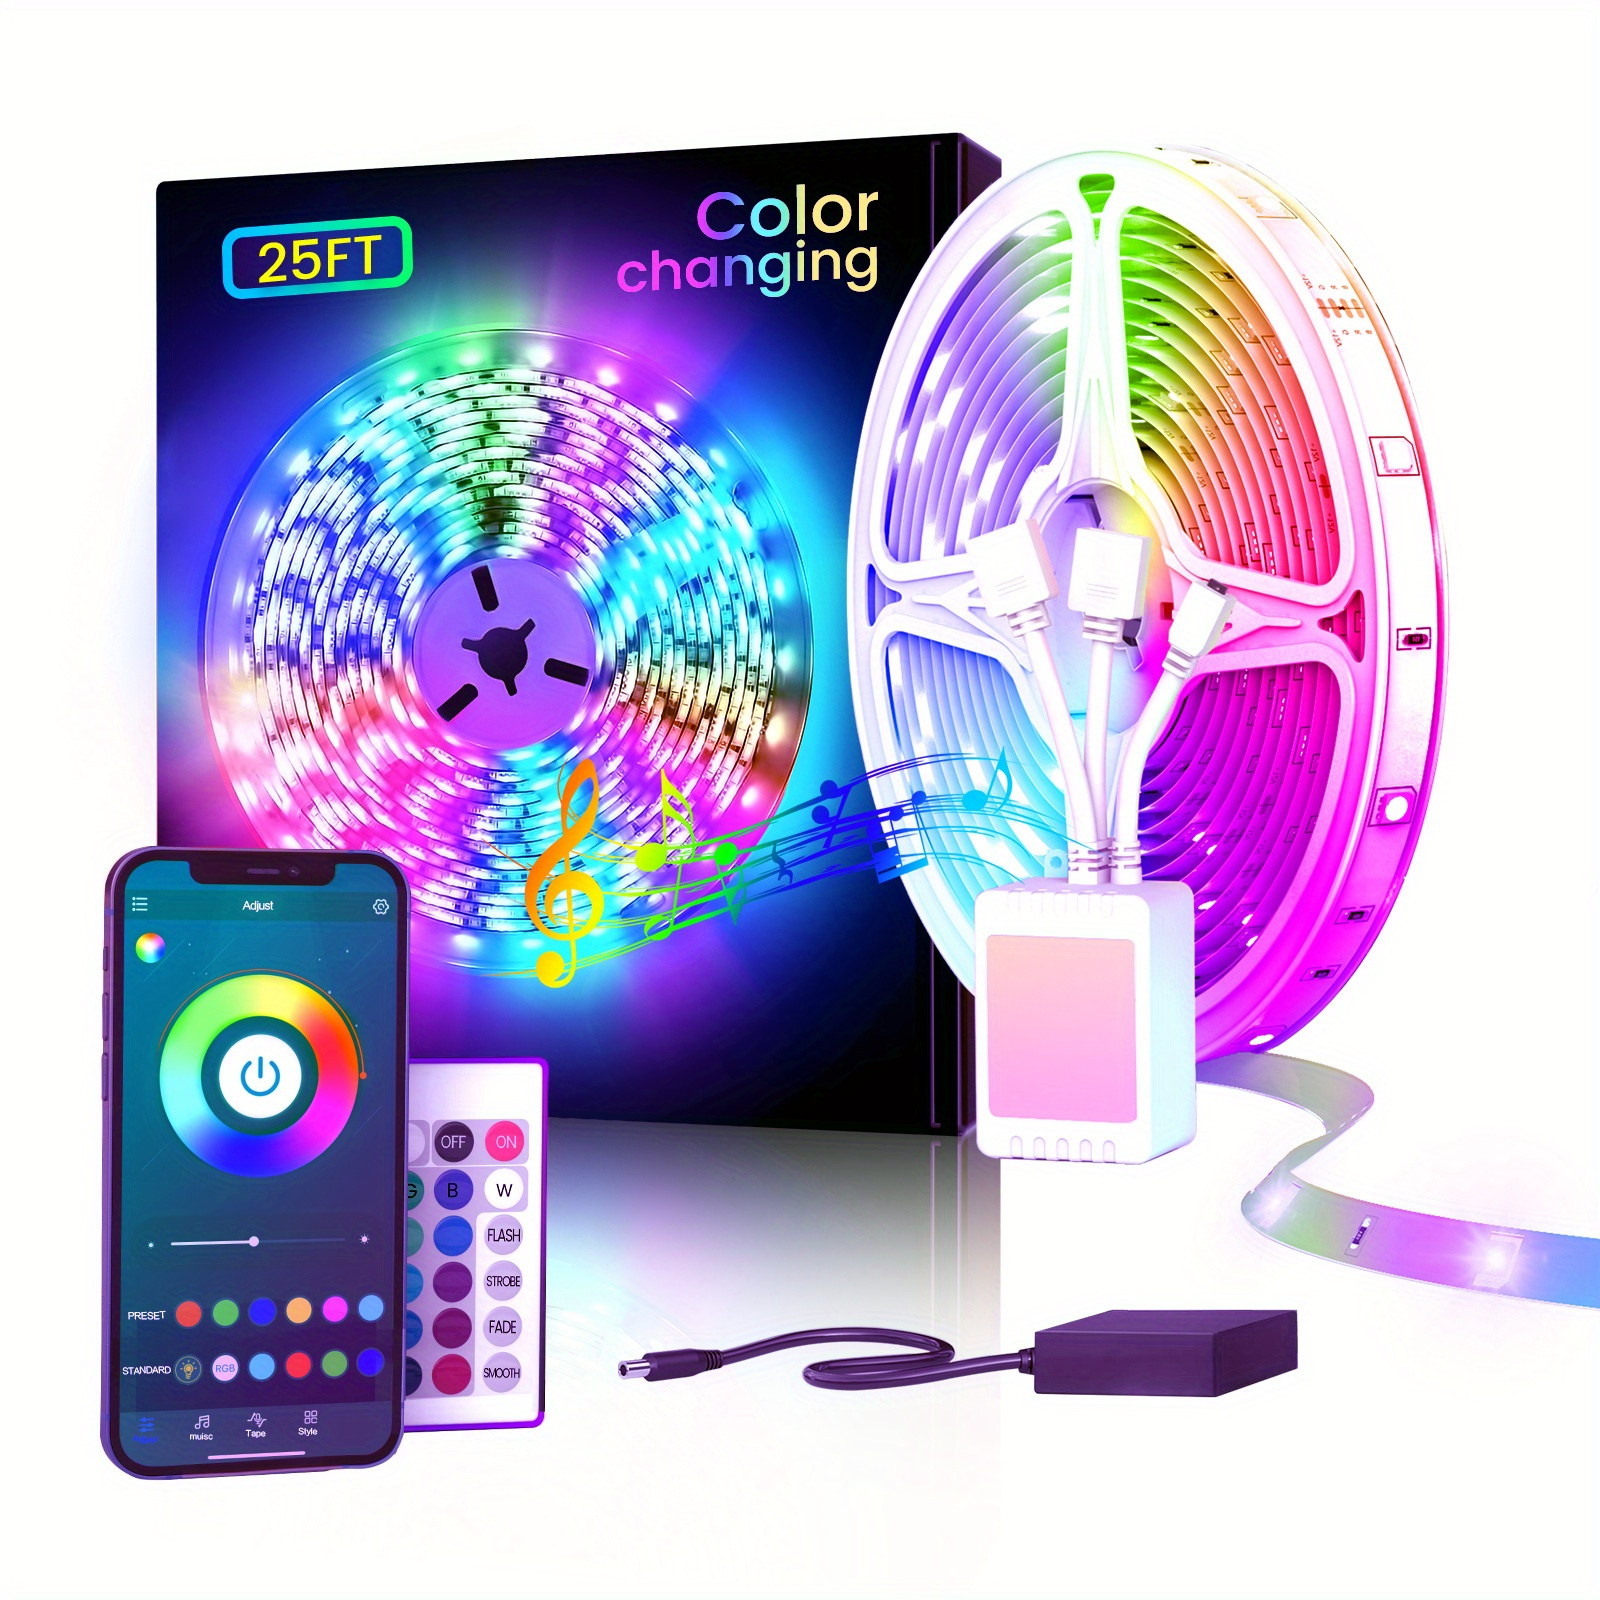 

25ft/7.5m Led Lights (1 Rolls Of 7.5m), With App Control Remote, Rgb Led Lights 24v For Bedroom, Home, Decoration Music Sync Color Changing Lights For Room Party